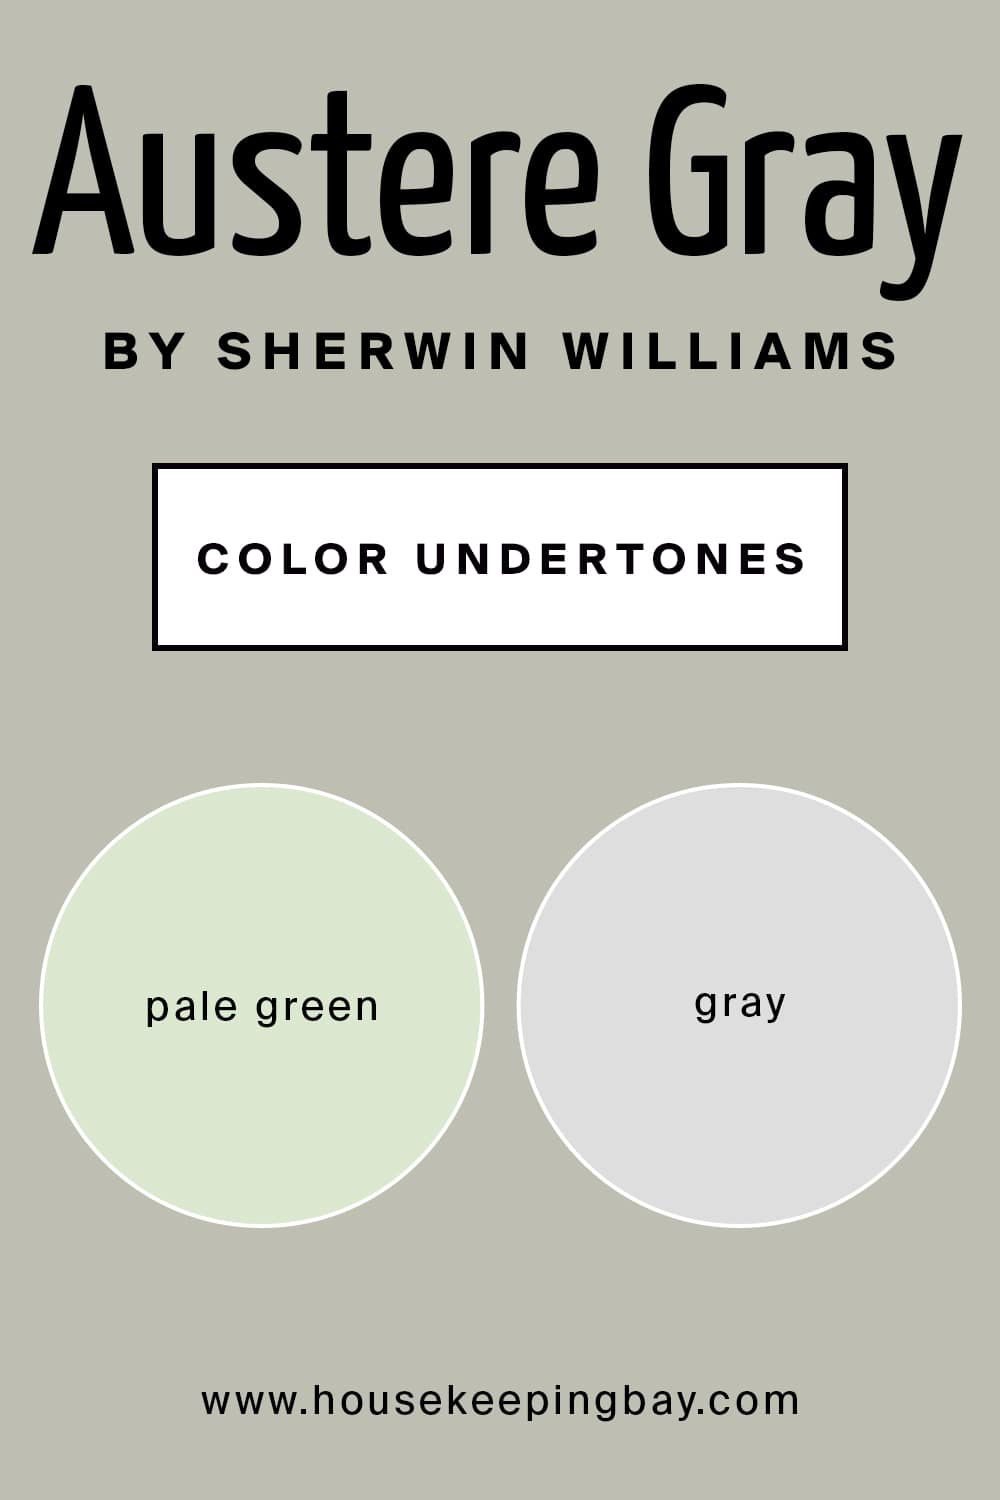 Austere Gray by Sherwin Williams Color Undertones